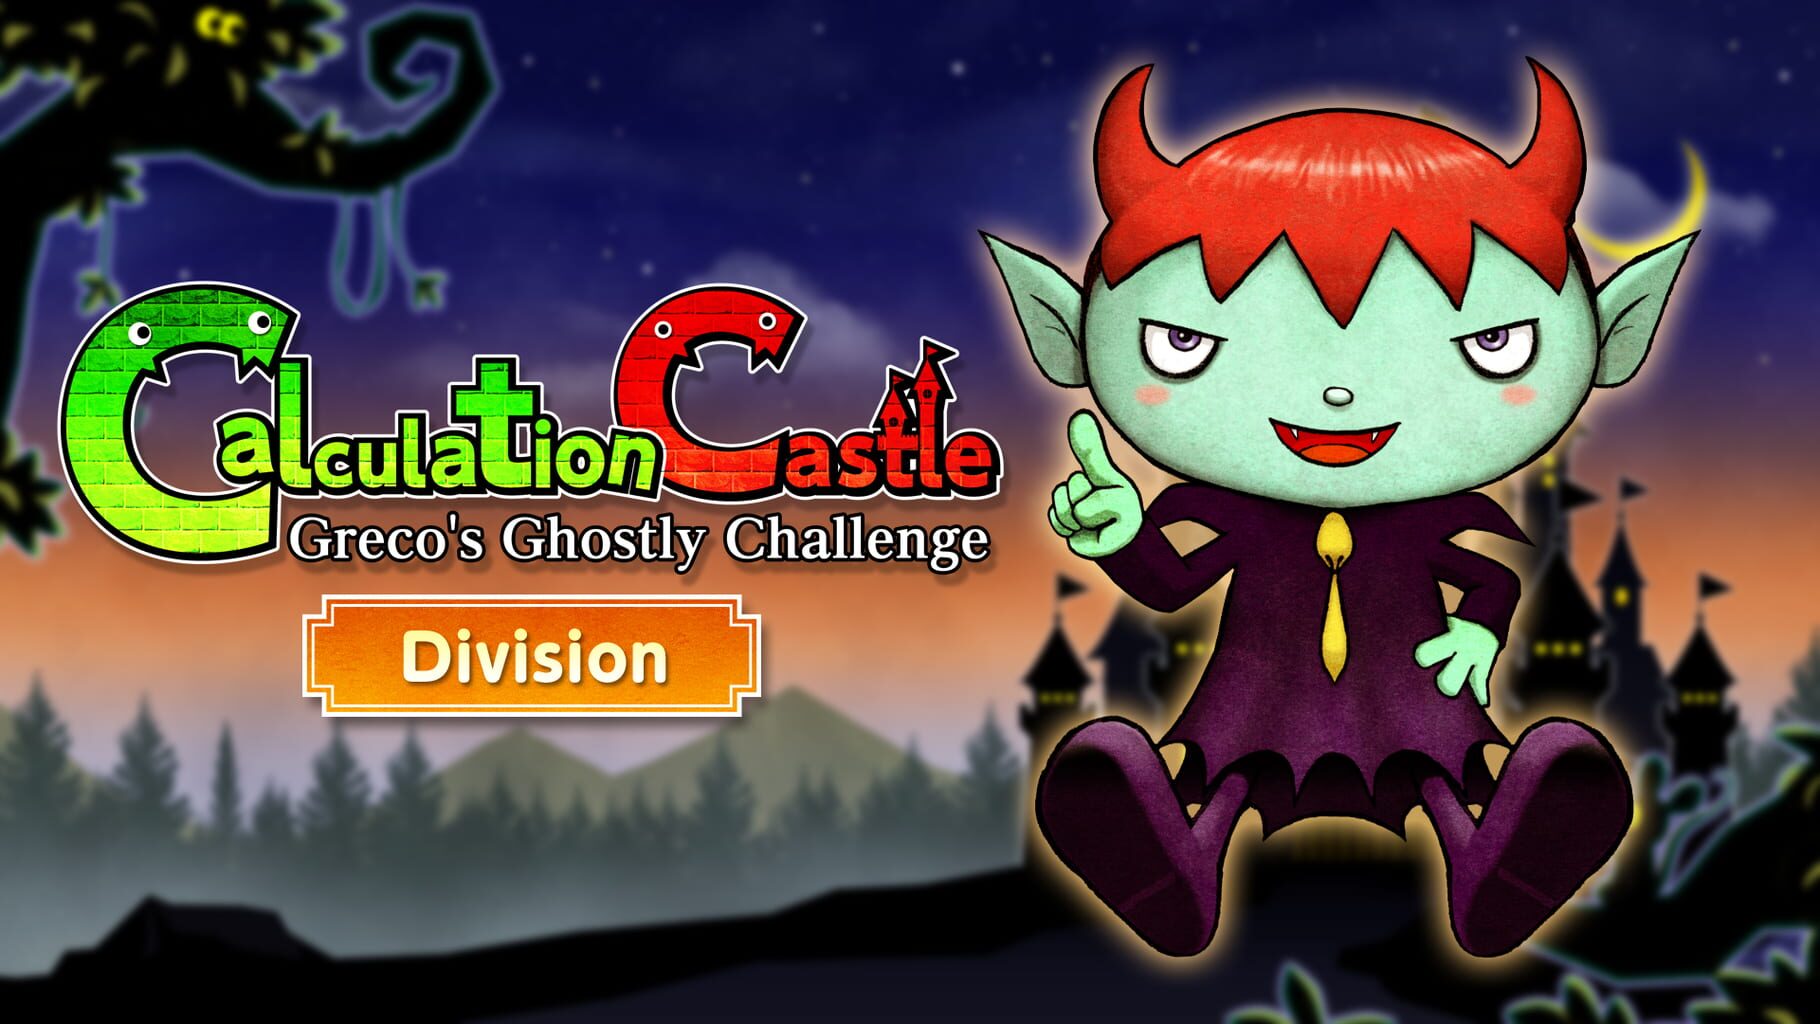 Calculation Castle: Greco's Ghostly Challenge "Division" artwork